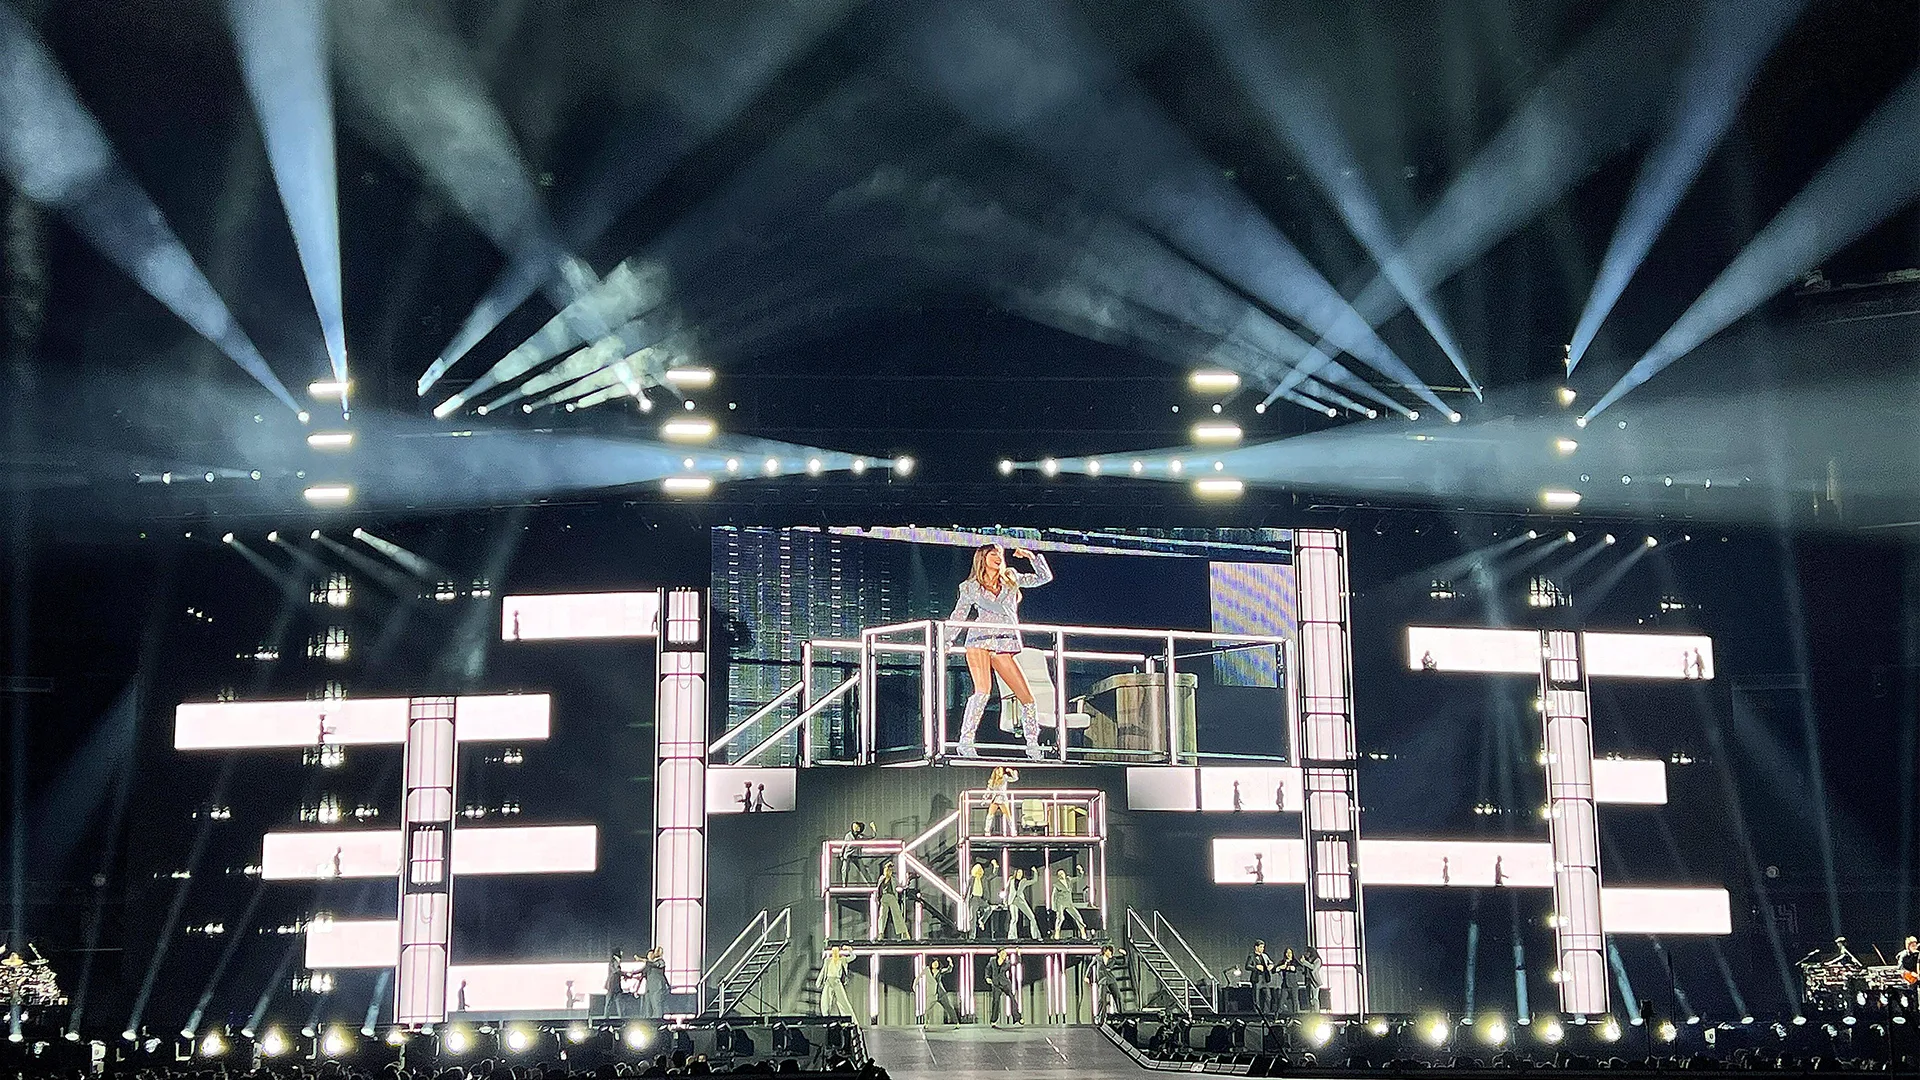 Taylor Swift singing on The Eras Tour stage. The stage design shows is a black background with blocks of white windows and silhouettes of people in them